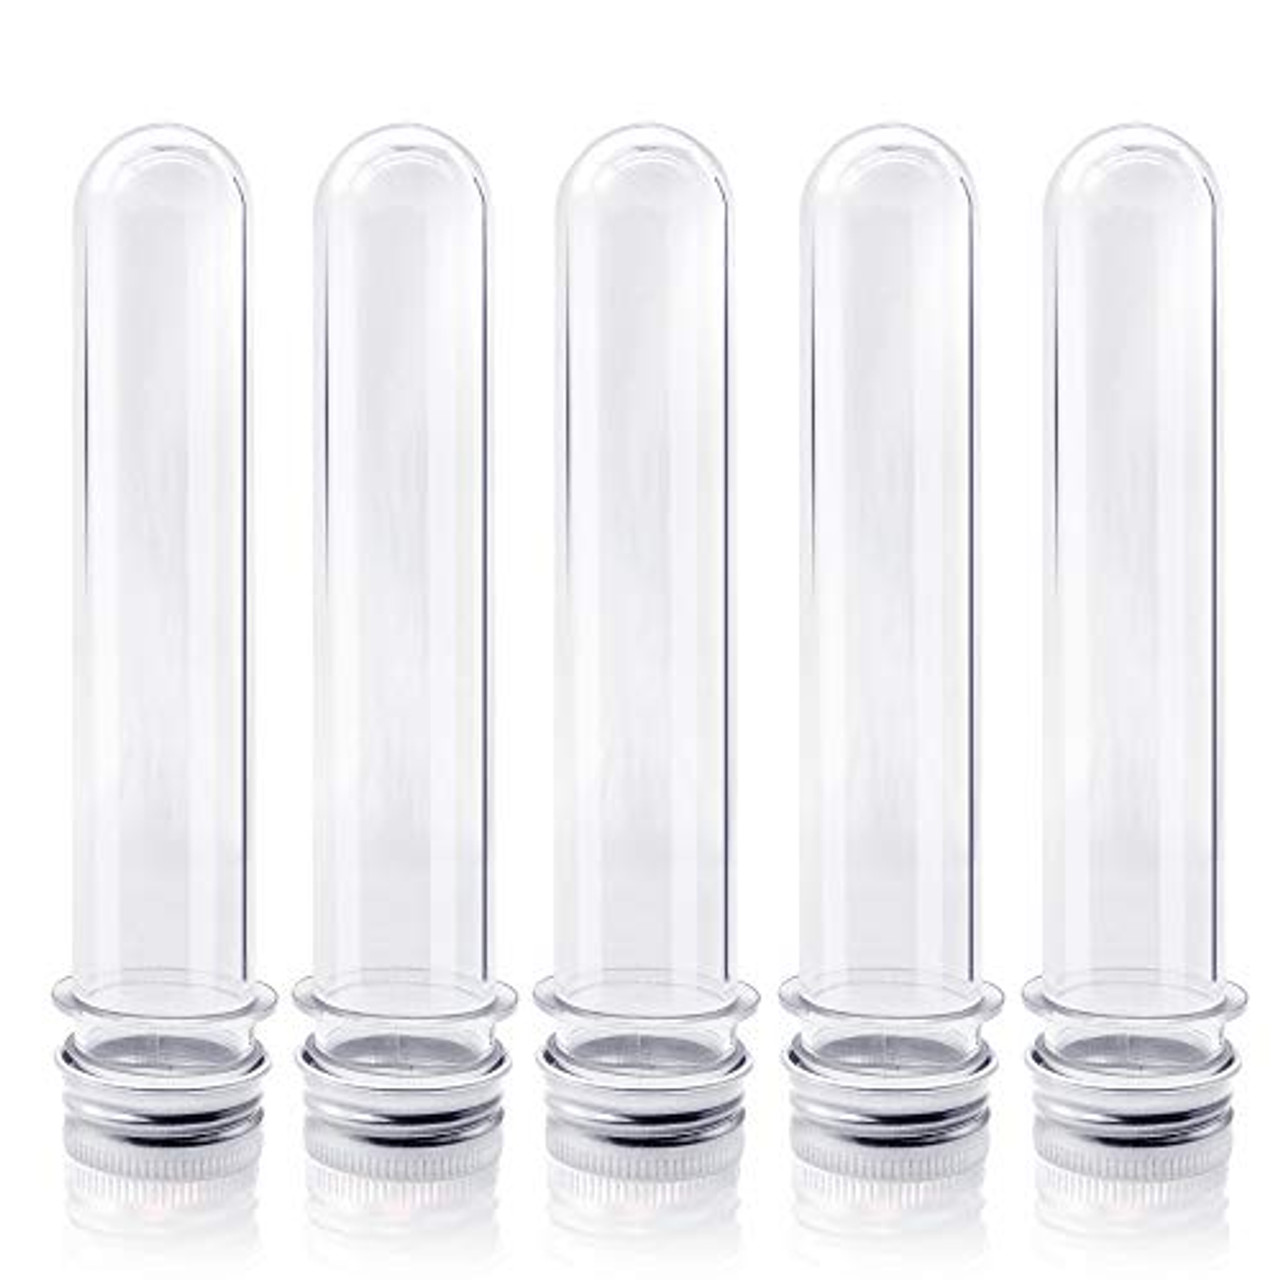 20 Pcs 40ml Glass Test Tubes,20 x 180mm Glass Test Tube with Cork Stoppers,Round Bottom Test Tube for Cultivated Plants,Science Themed Party and Candy Bath Salt Storage Container